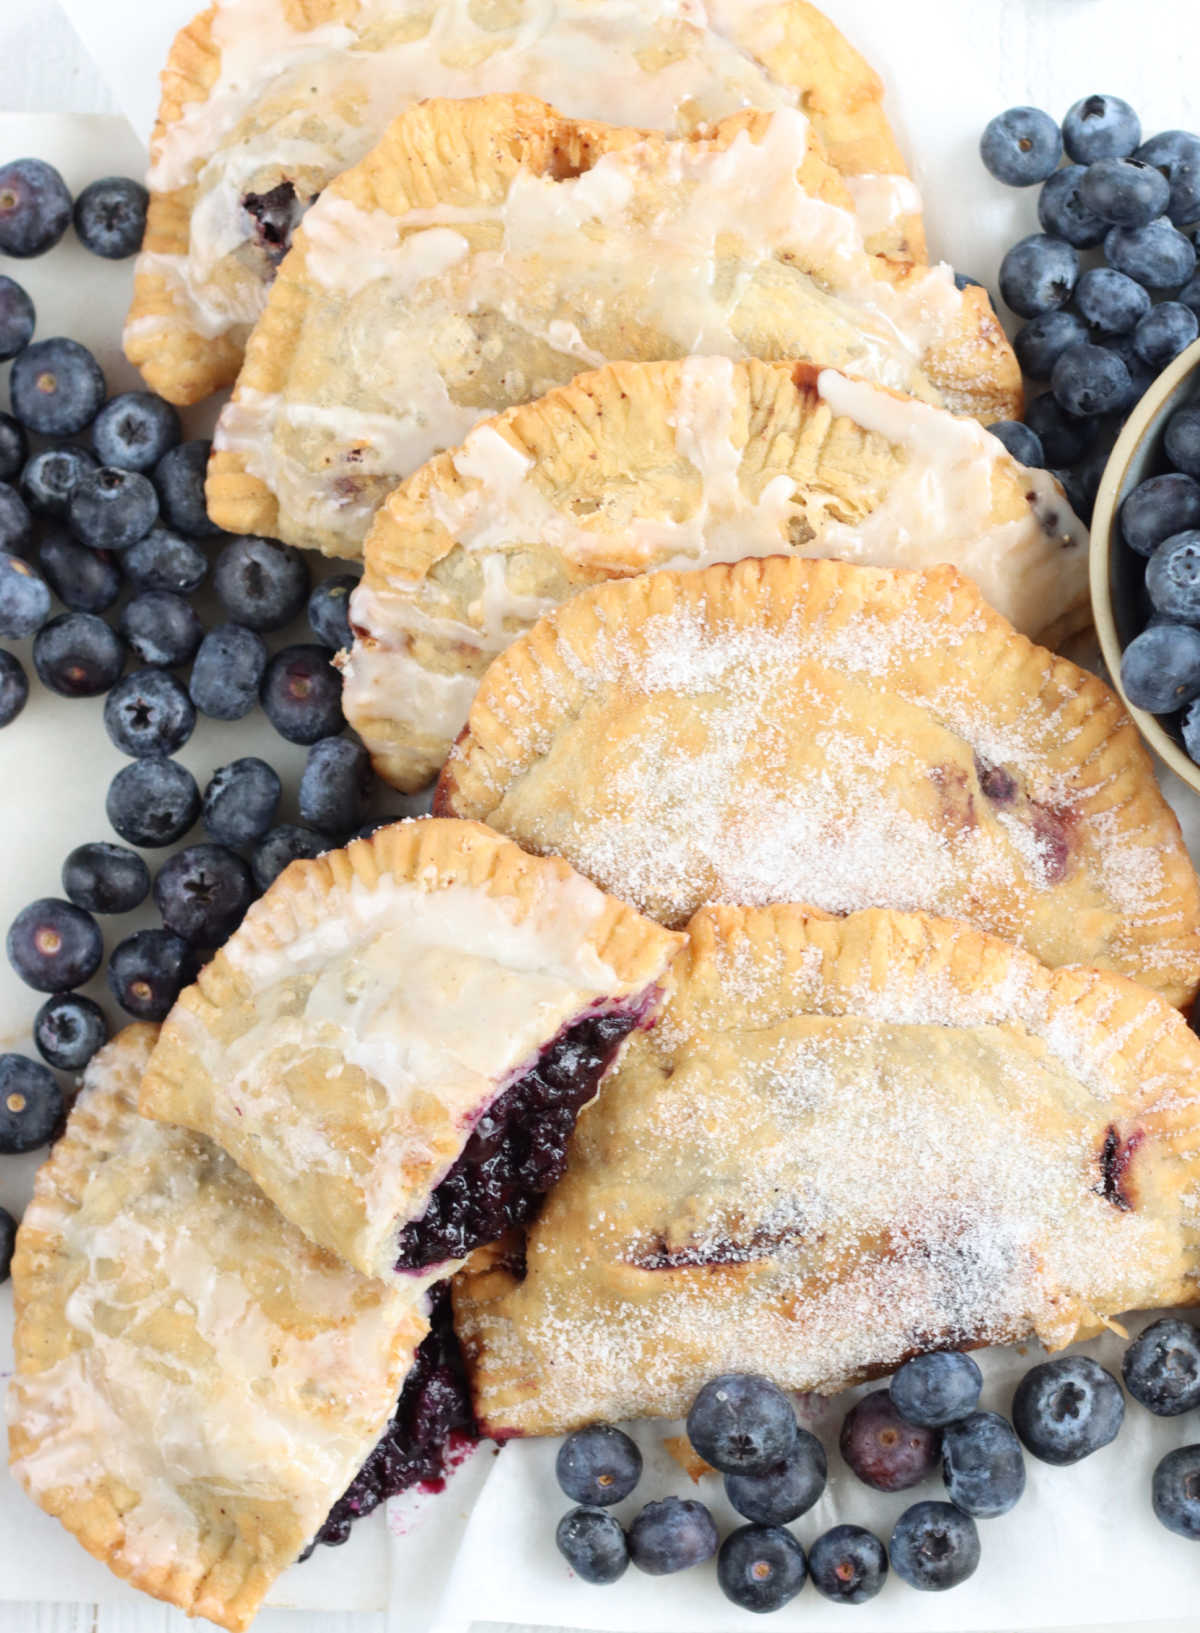 Blueberry hand pies on white marble with fresh blueberries around.